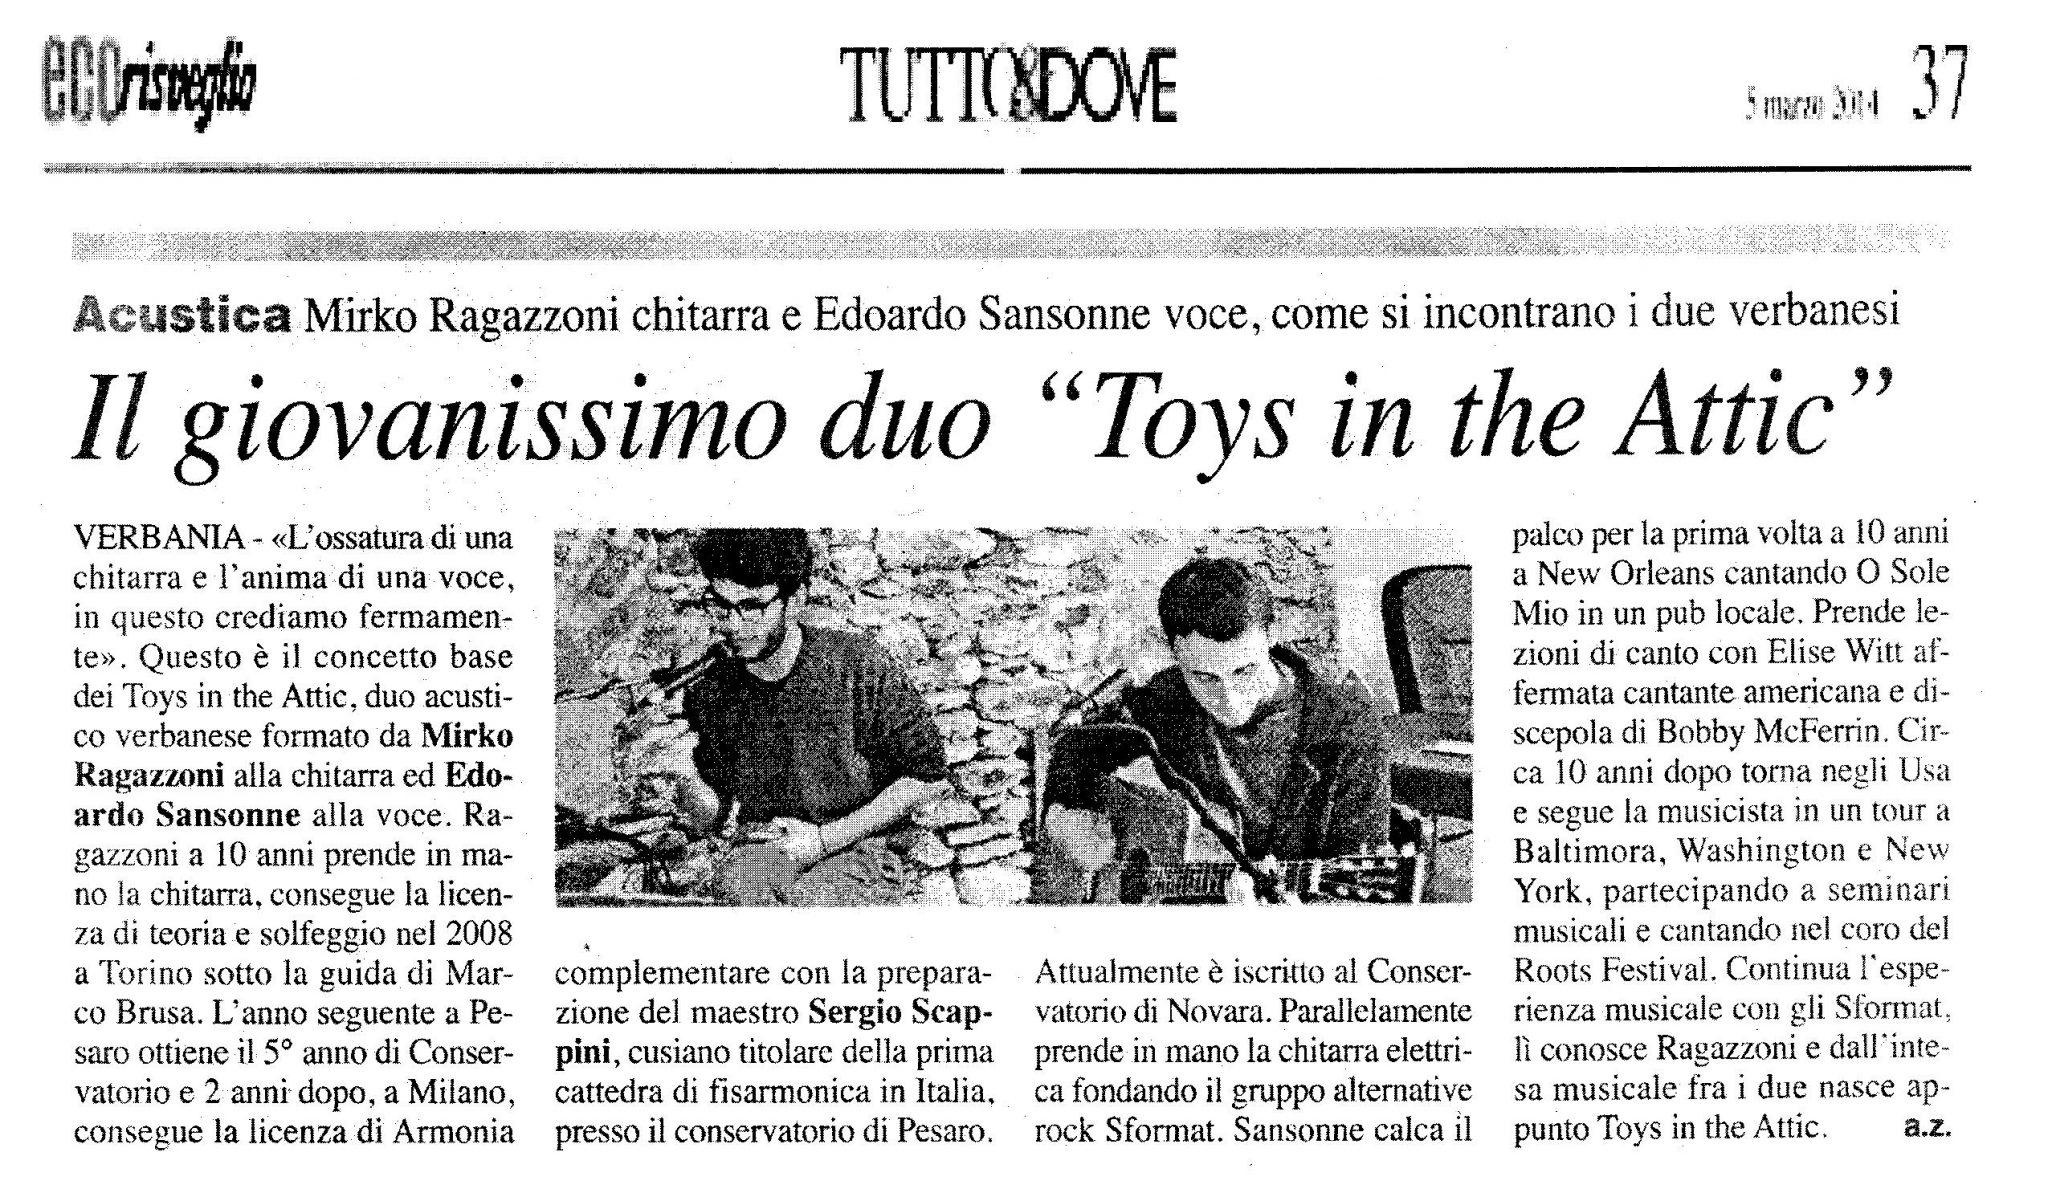 Il giovanissimo duo “Toys in the Attic” (The very young duo “Toys in the Attic”)